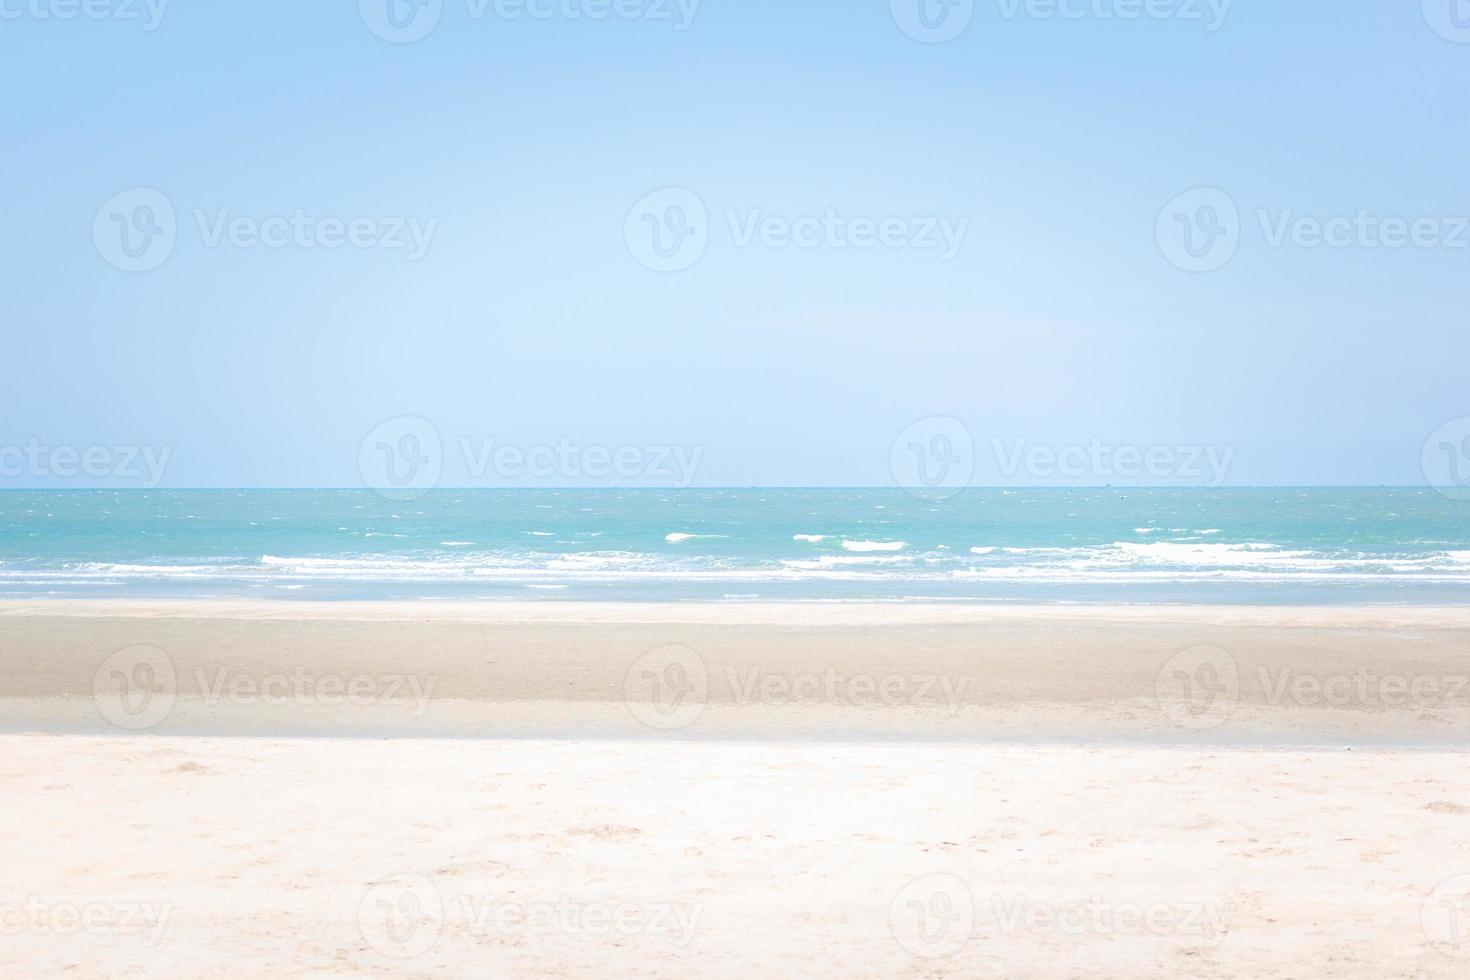 The beach, the sea and the sky are comfortable and peaceful. photo